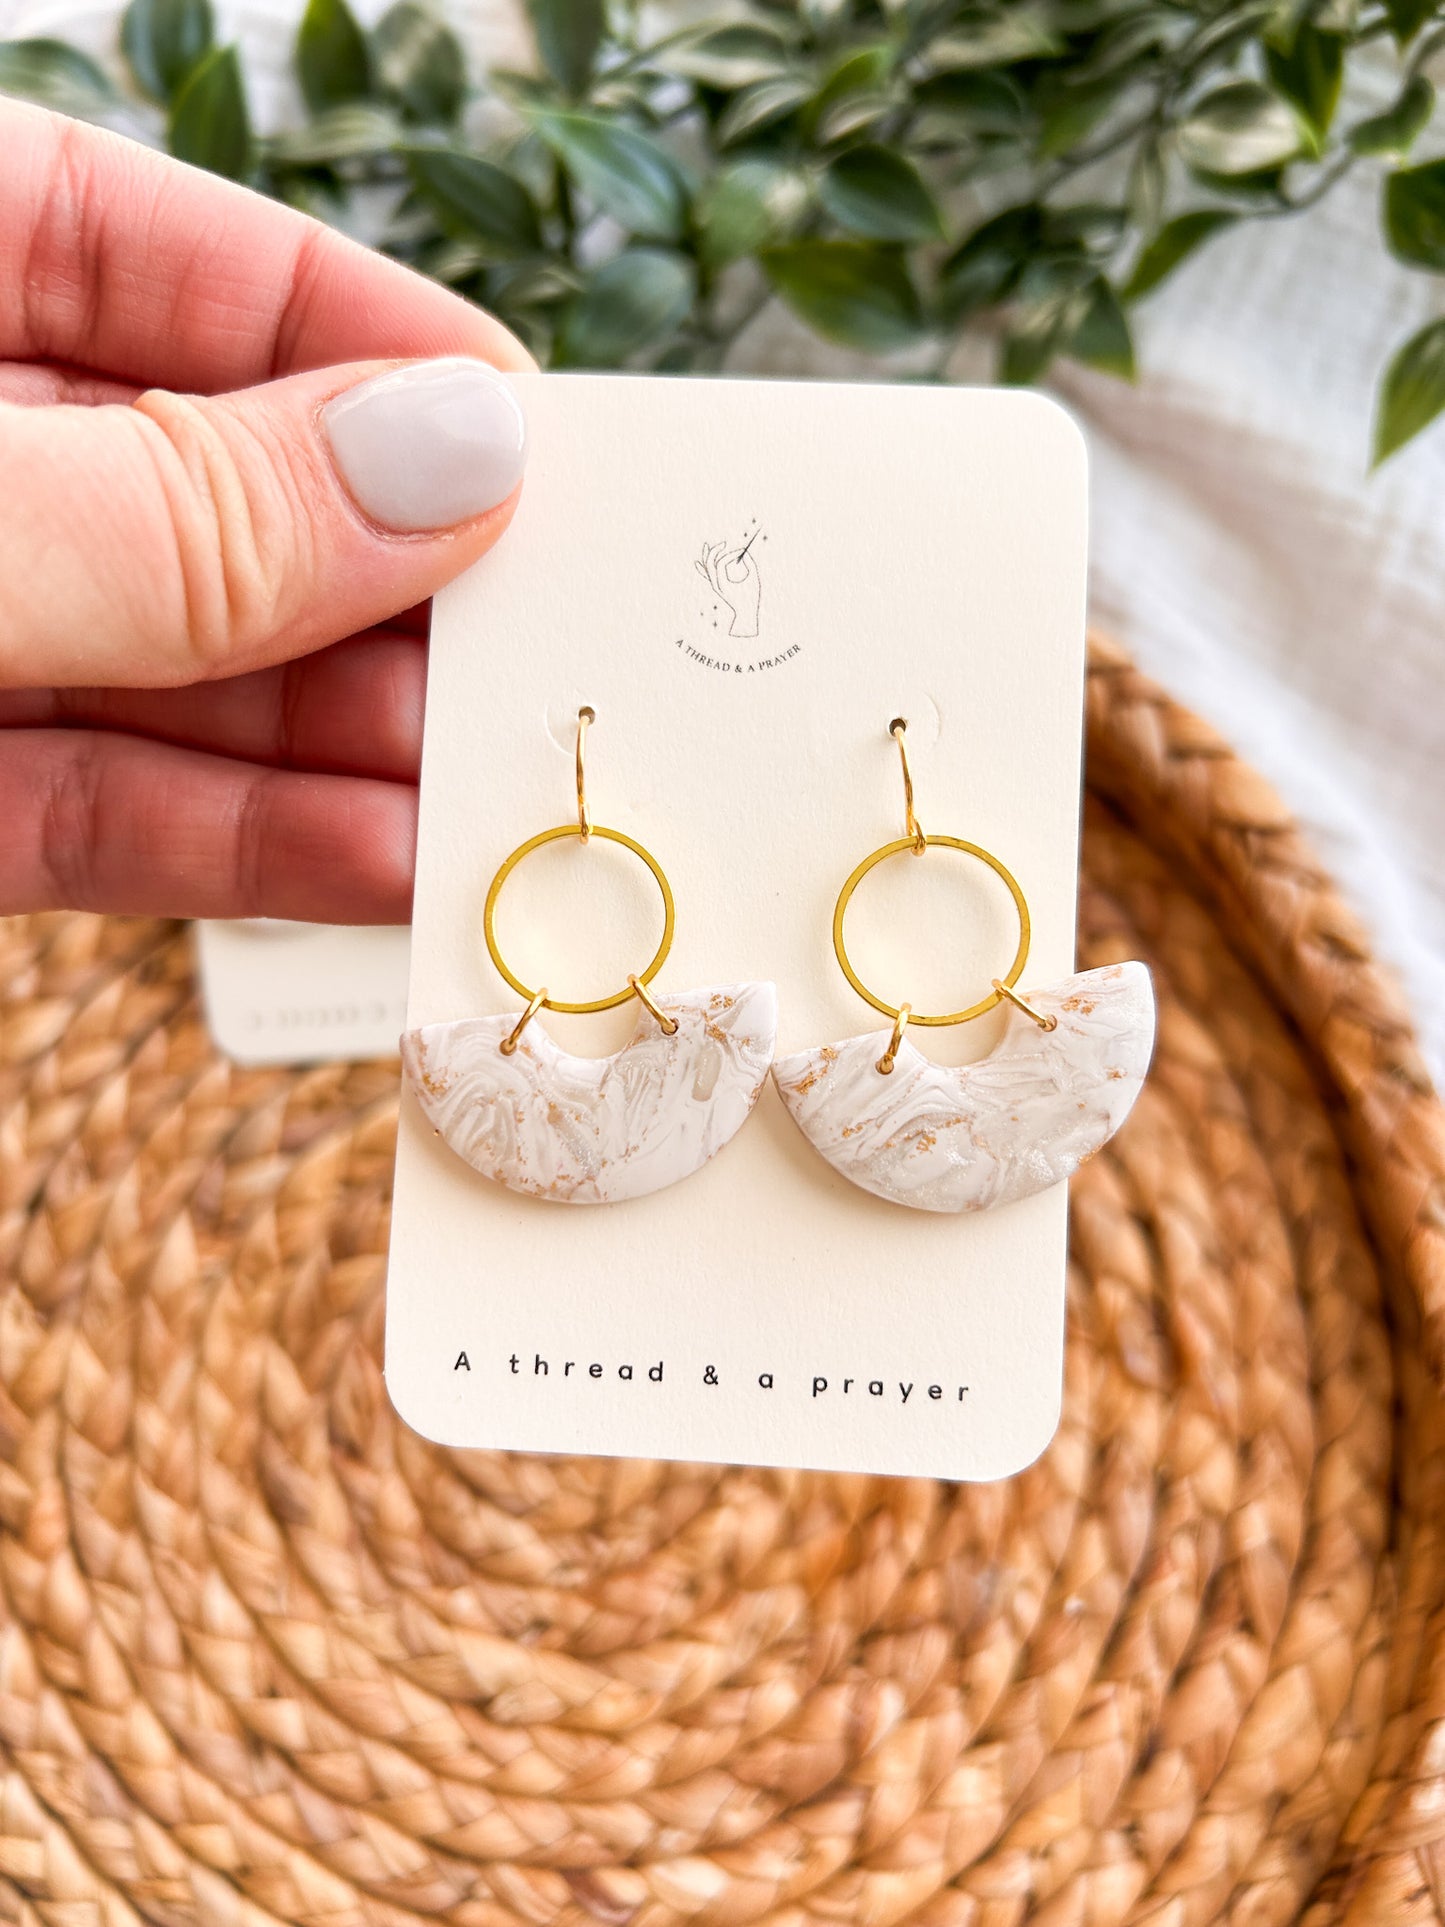 Snowy Days Shiny Resin Marble Clay Earrings | Winter Fashion | Snowy Vibes | Statement Earrings | Lightweight